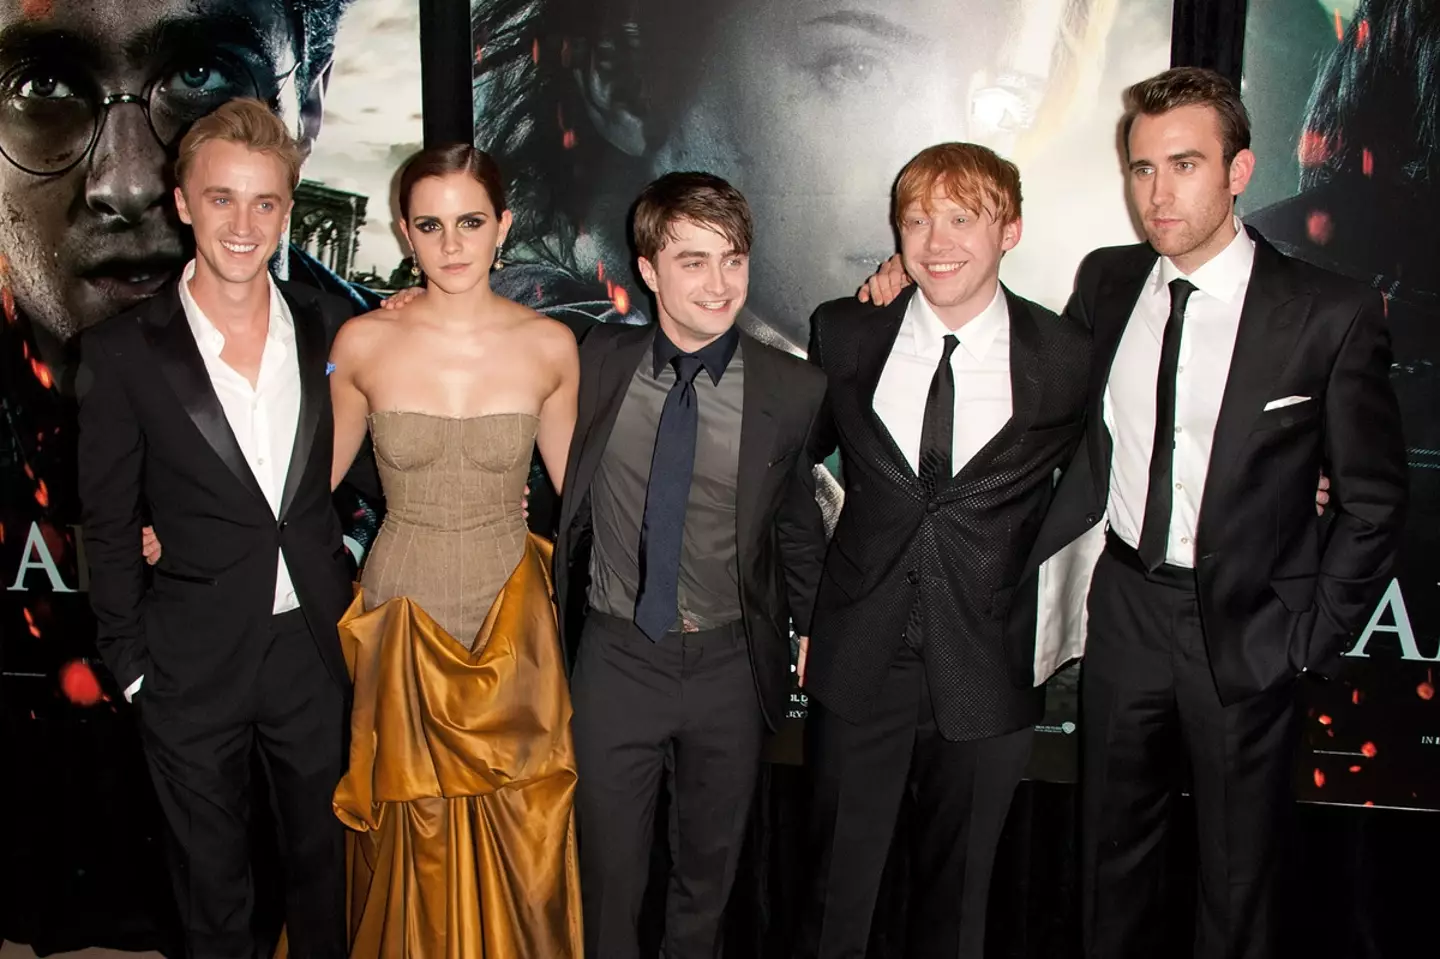 Daniel Radcliffe and Emma Watson with Harry Potter co-stars (